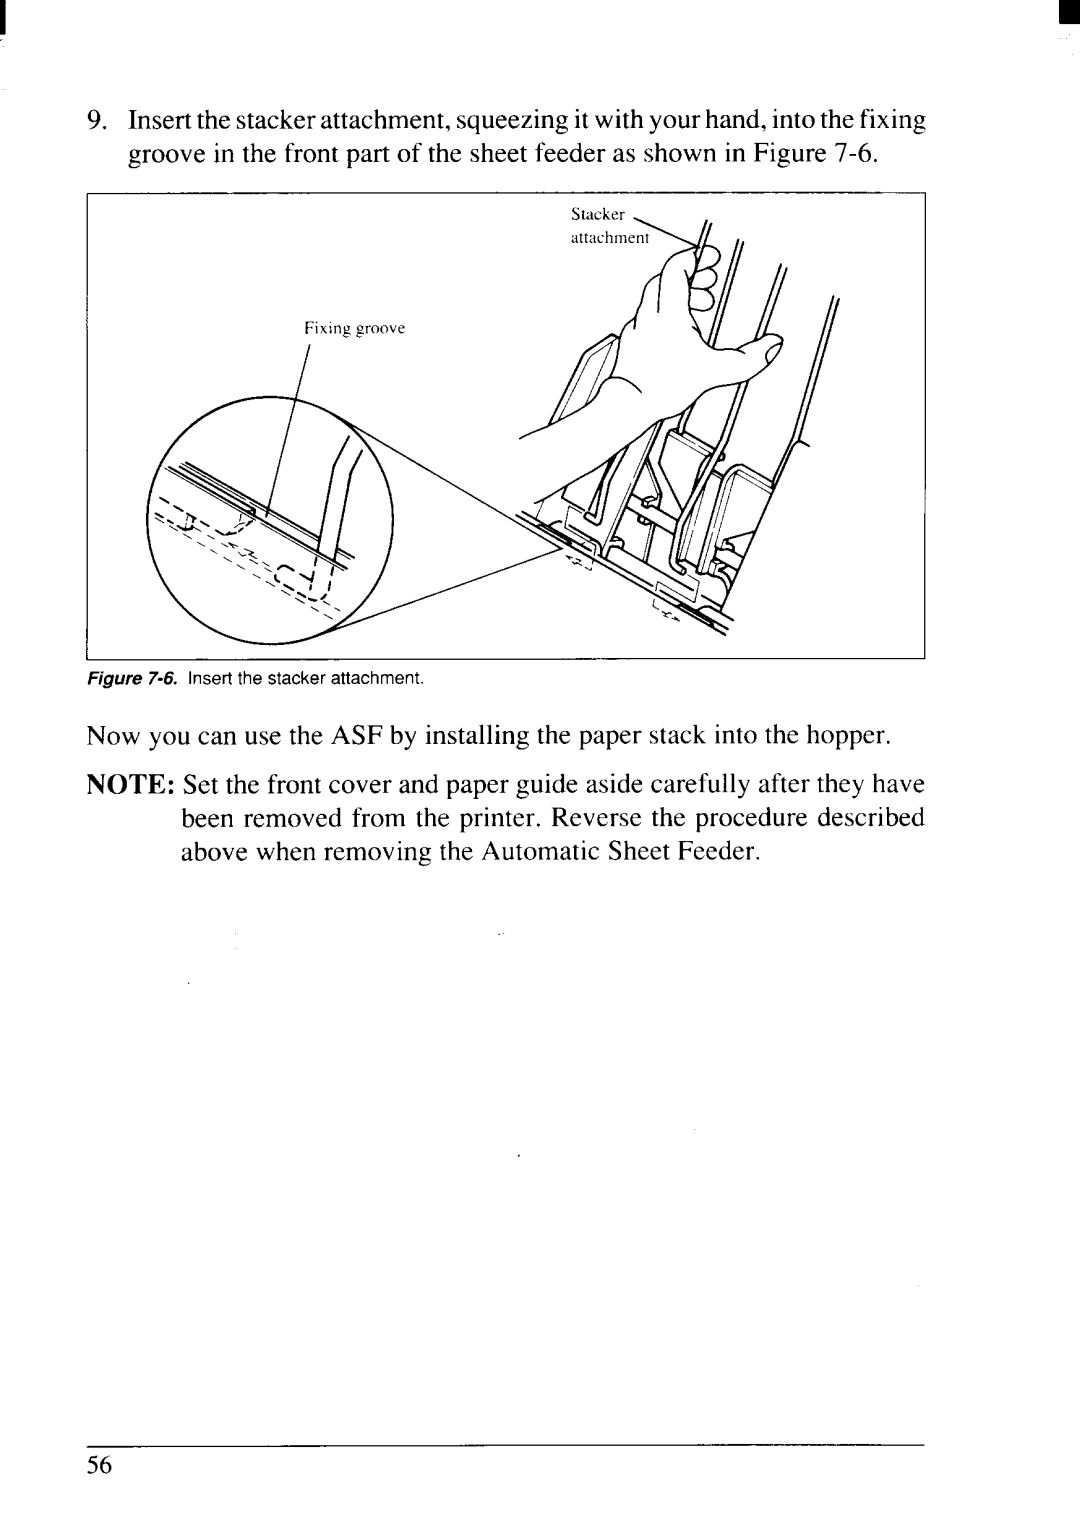 Star Micronics NX-2415II user manual Now you can use the ASF by installing the paper stack into the hopper 